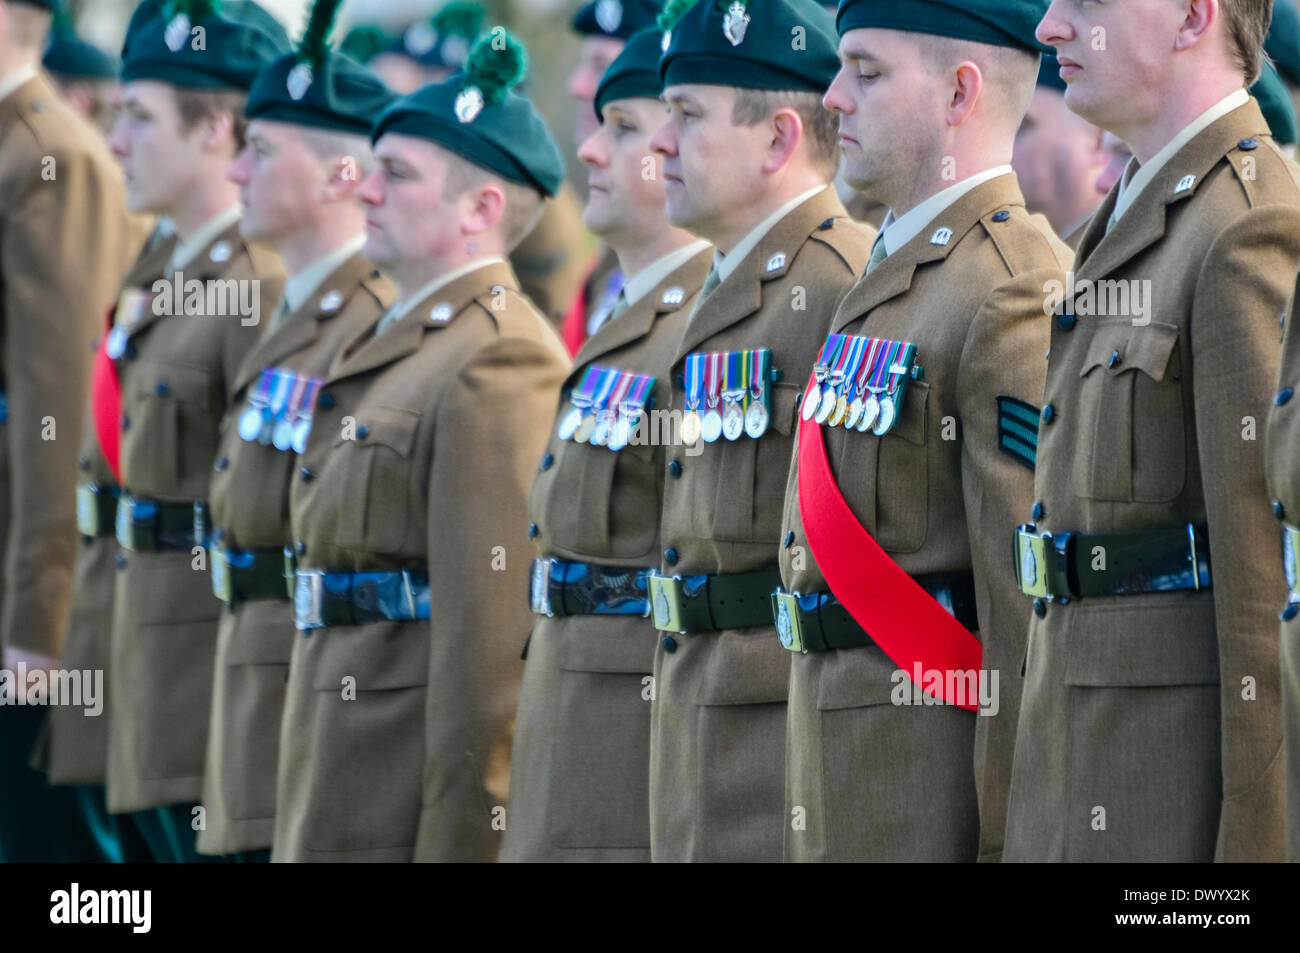 Lisburn, Northern Ireland. 15 Mar 2014 - Soldiers lined up for the ...